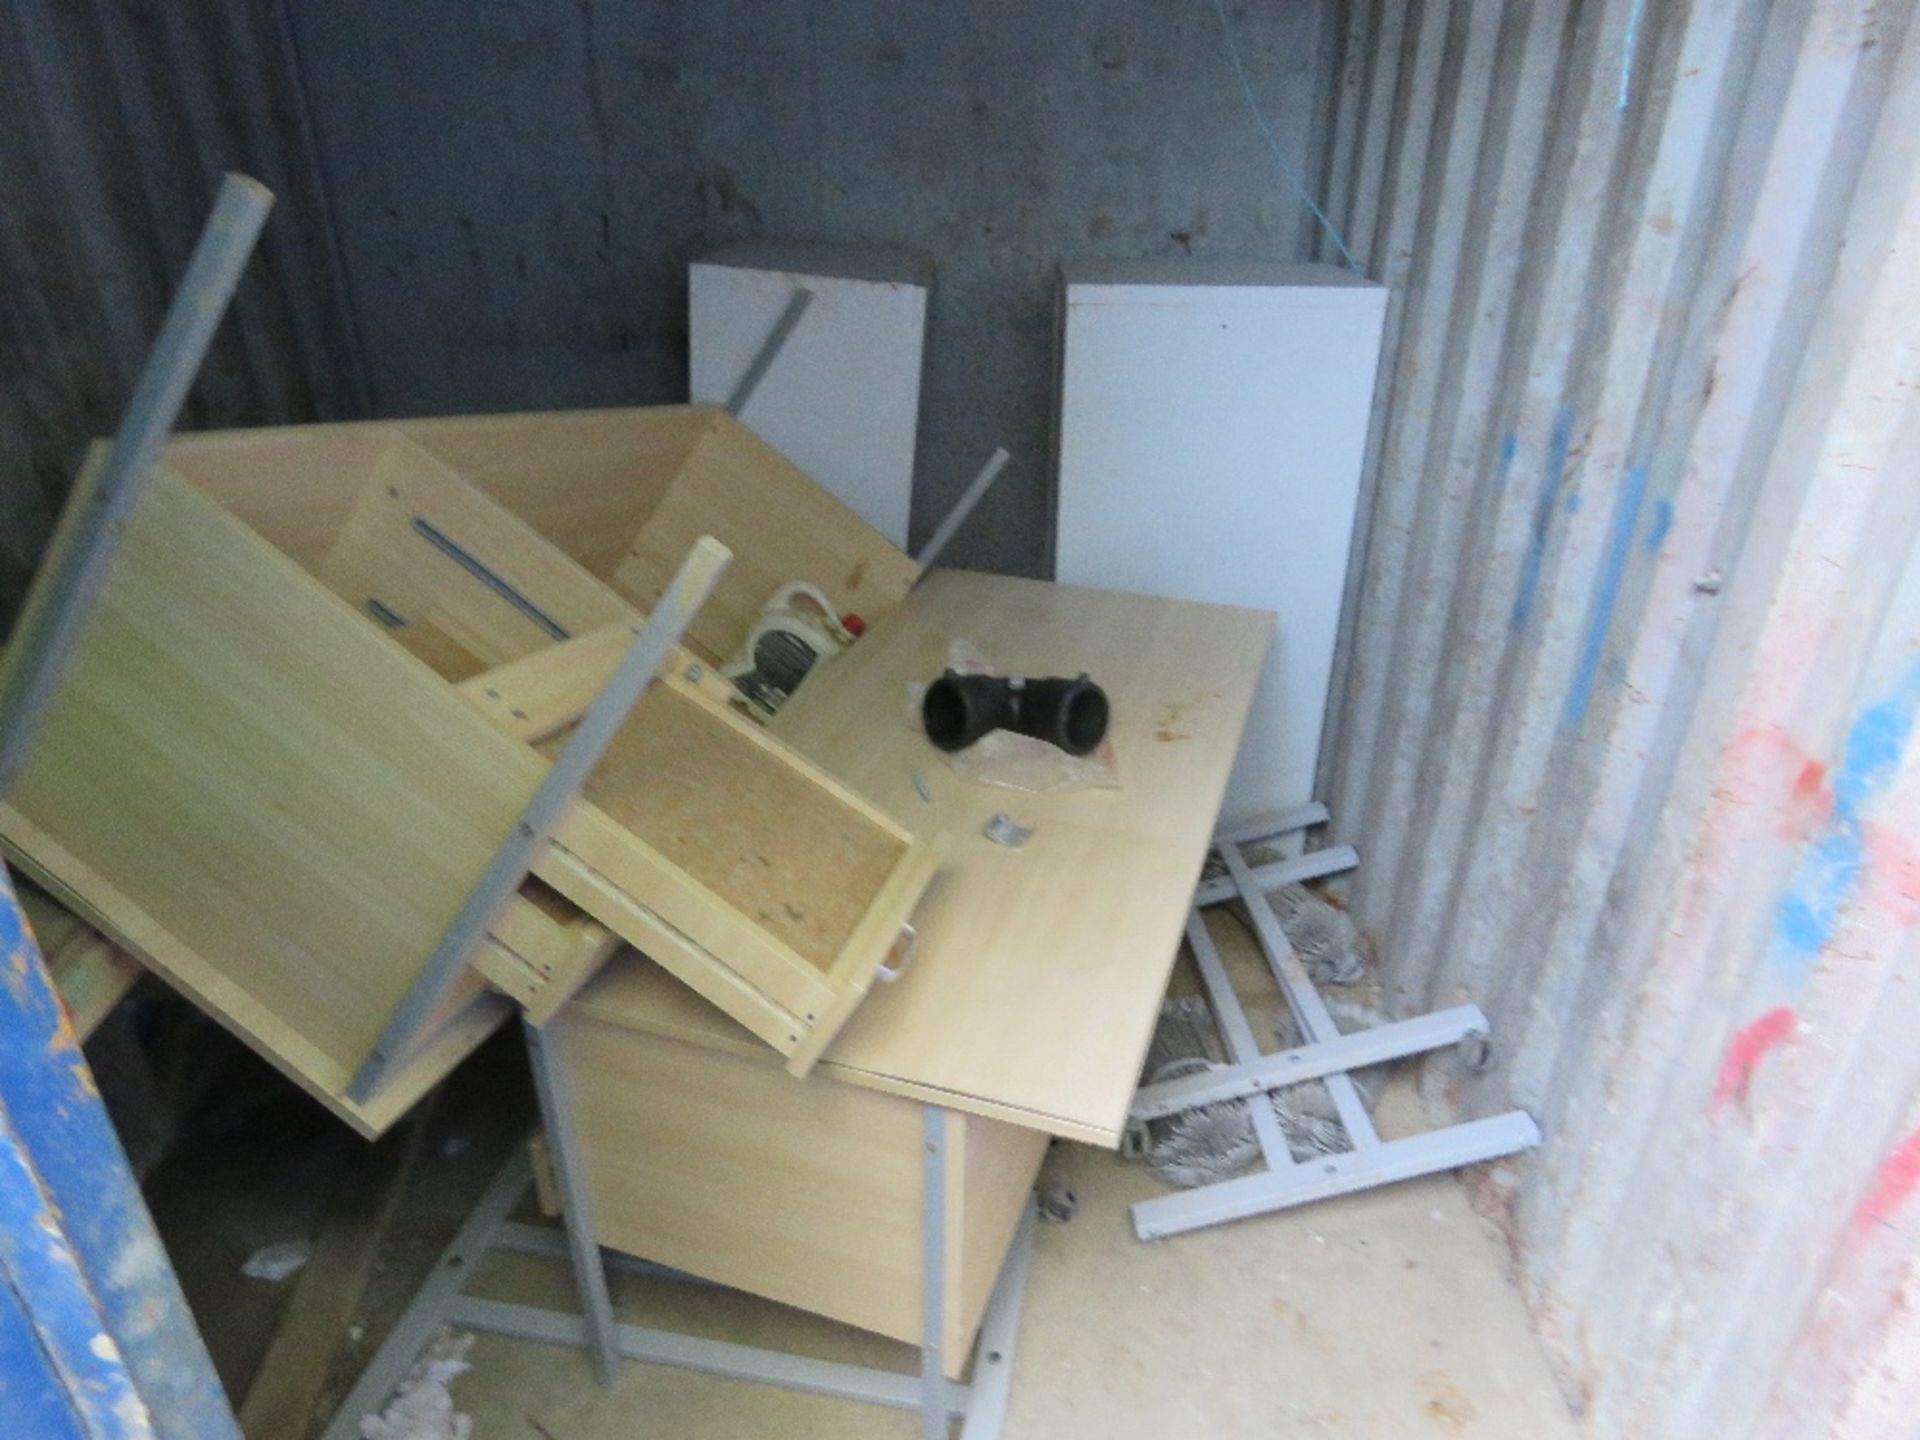 SECURE STEEL SITE OFFICE/STORE. 20FT LENGTH X 8FT WIDTH APPROX. NO KEYS, UNLOCKED. SOURCED FROM SIT - Image 4 of 9